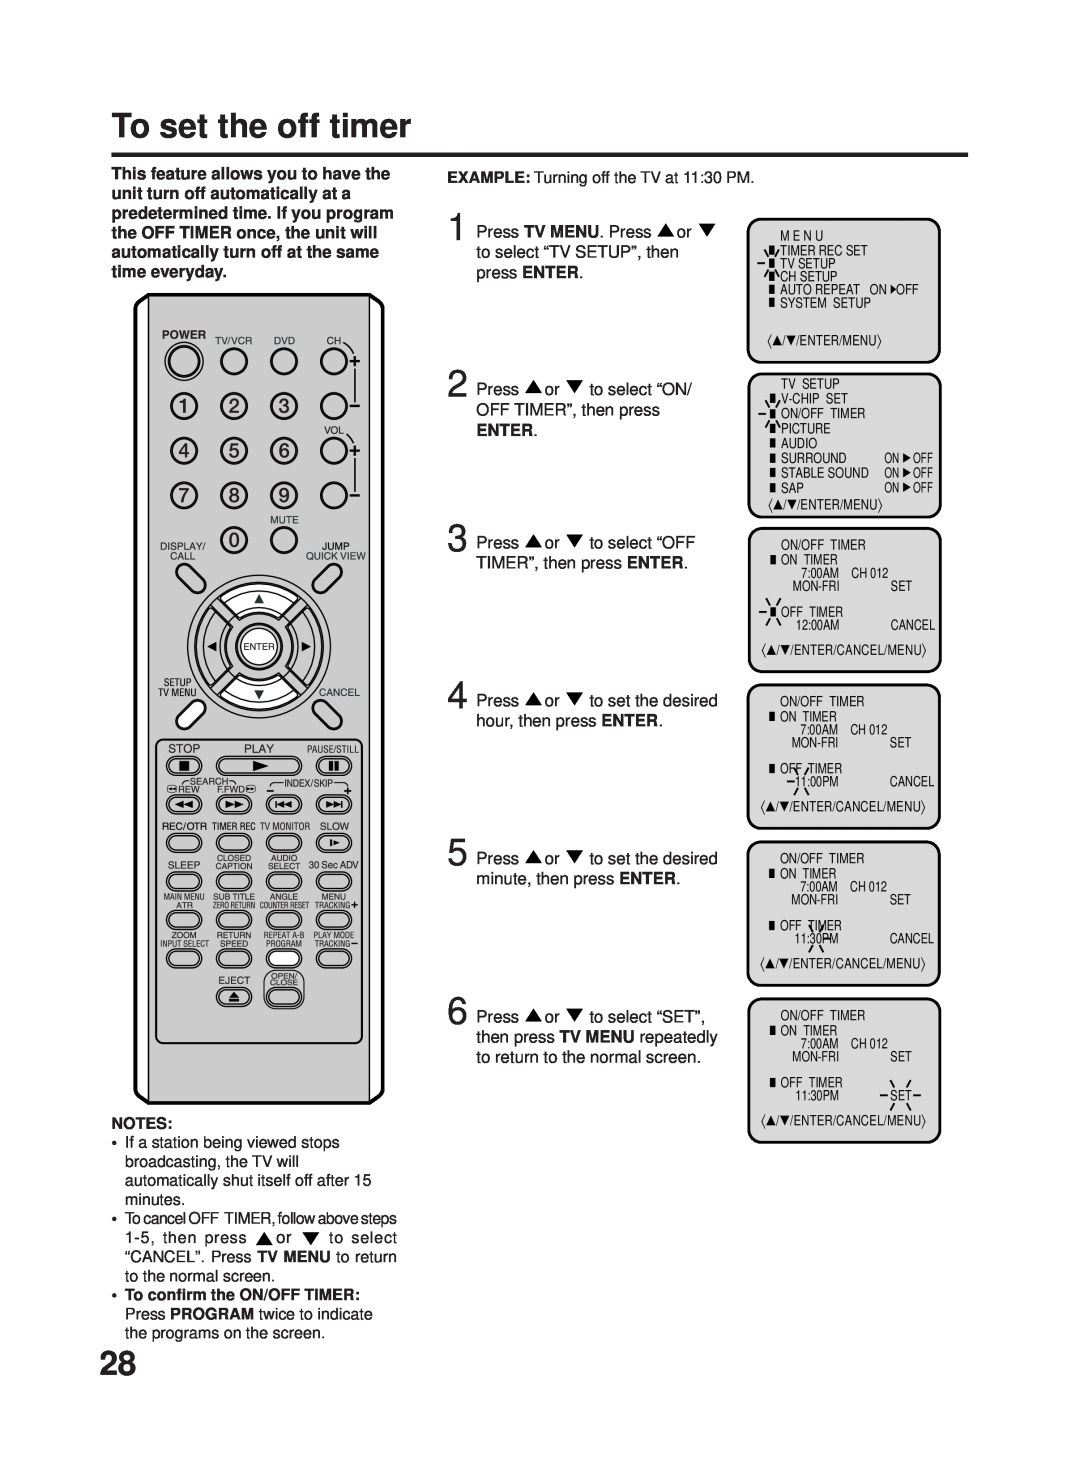 RCA 27F500TDV manual To set the off timer, Enter, Stable Sound On 